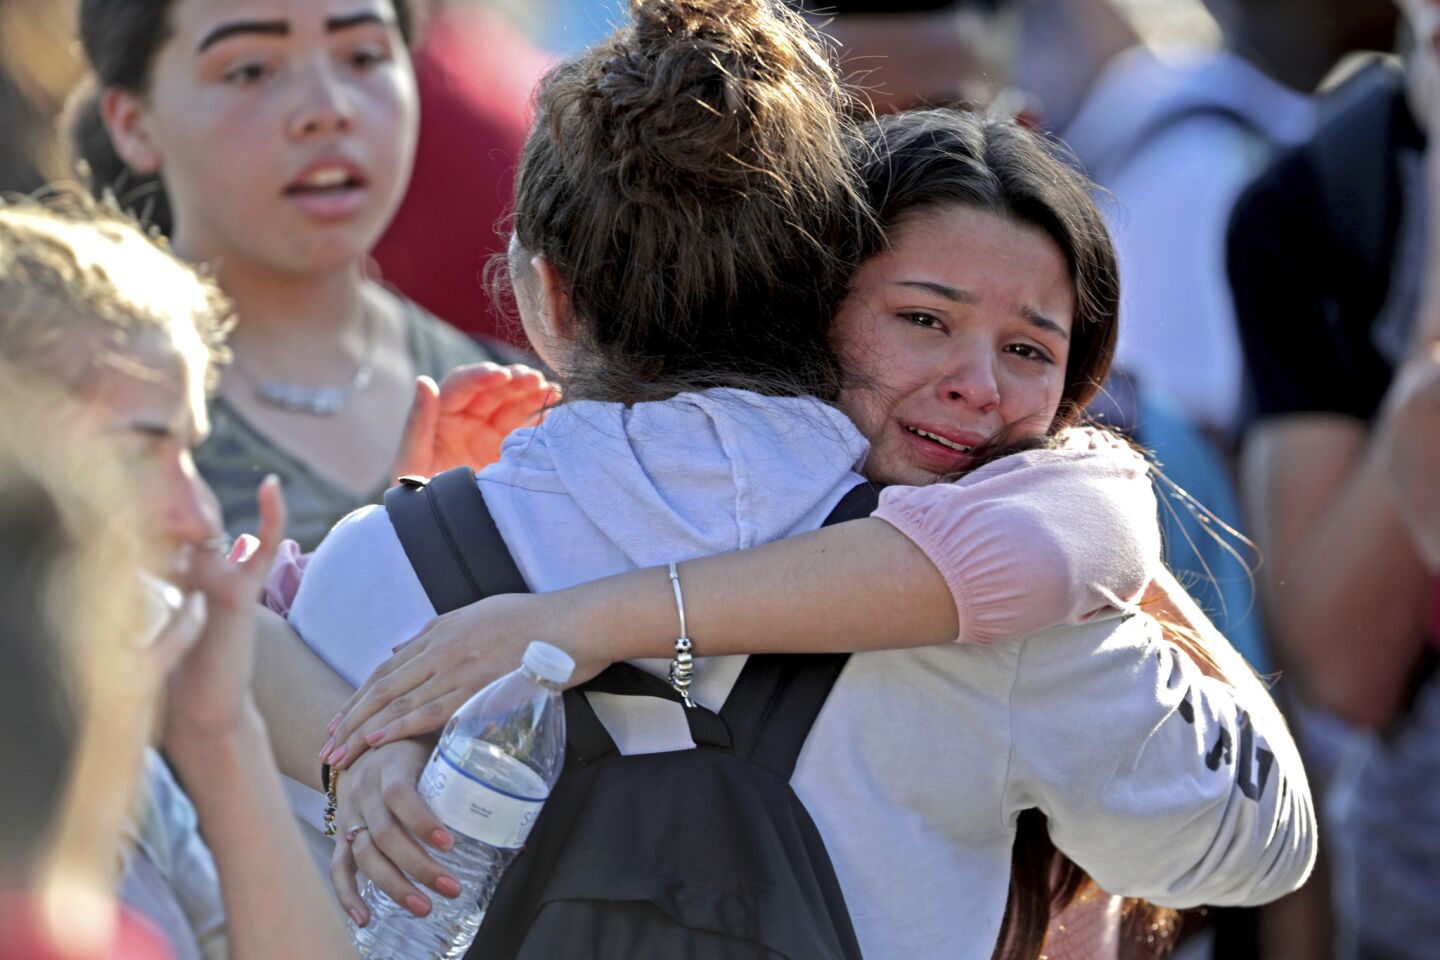 Students released from a lockdown embrace after the shooting at Marjory Stoneman Douglas High School in Parkland, Fla.